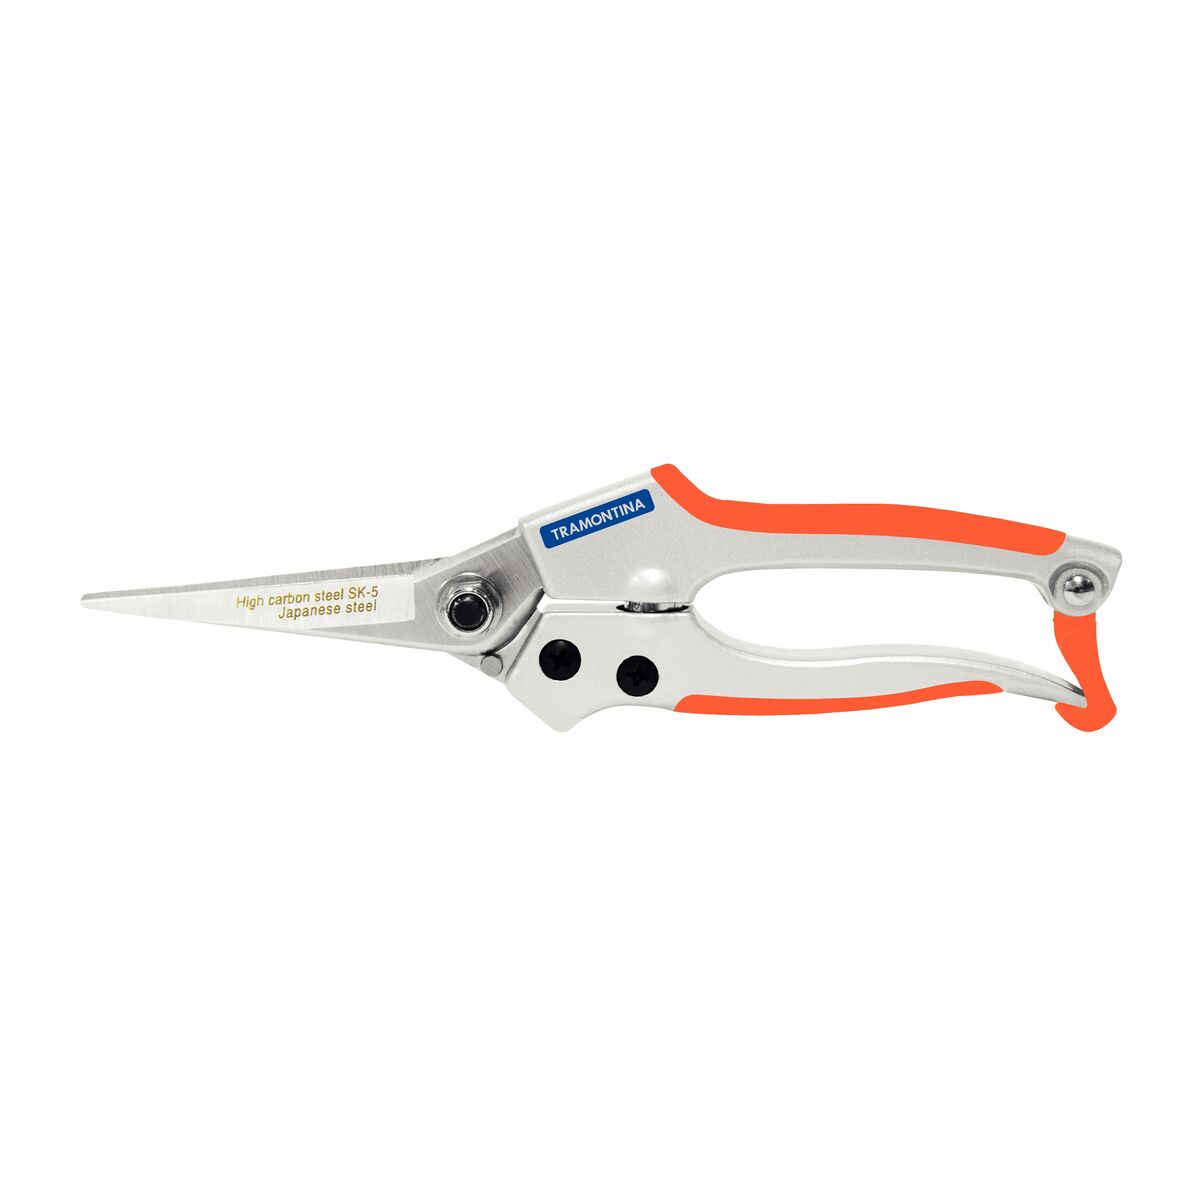 Tramontina's professional steel fruit pruner with rubber-coated handles